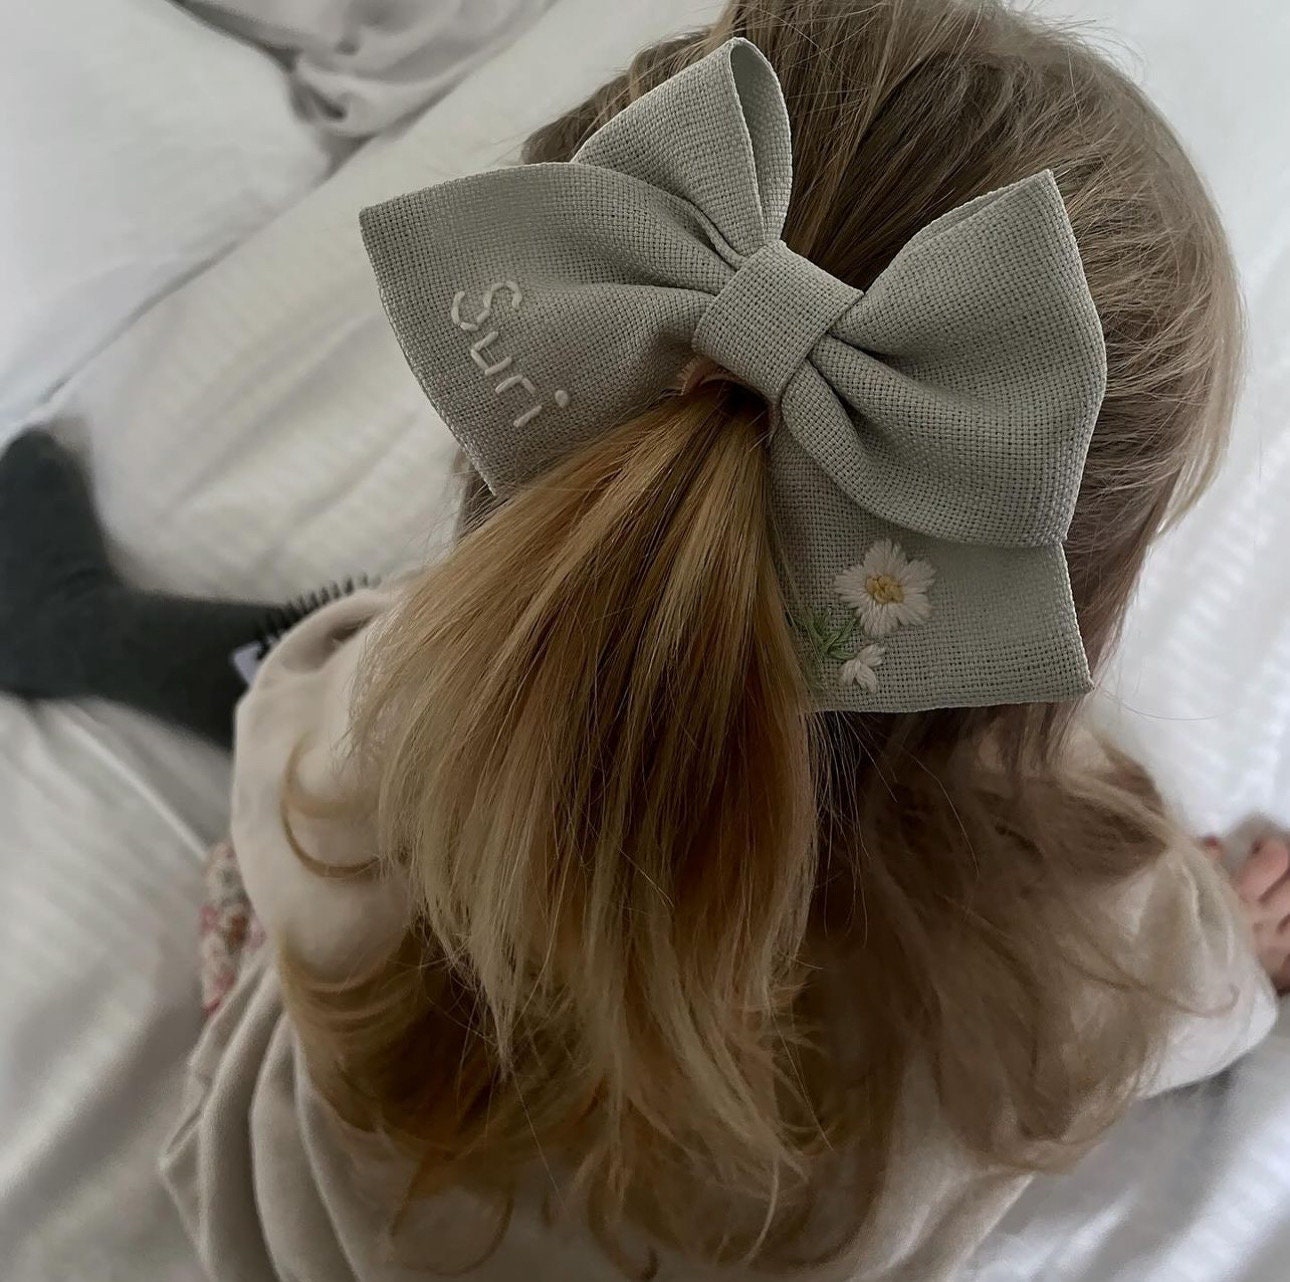 🎁Buy 2 FREE SHIPPING🎁|Personalized Hair Bow for Girls, Name Embroidered Hair Clip, Baby Hair Clips, Toddler Bows with Name